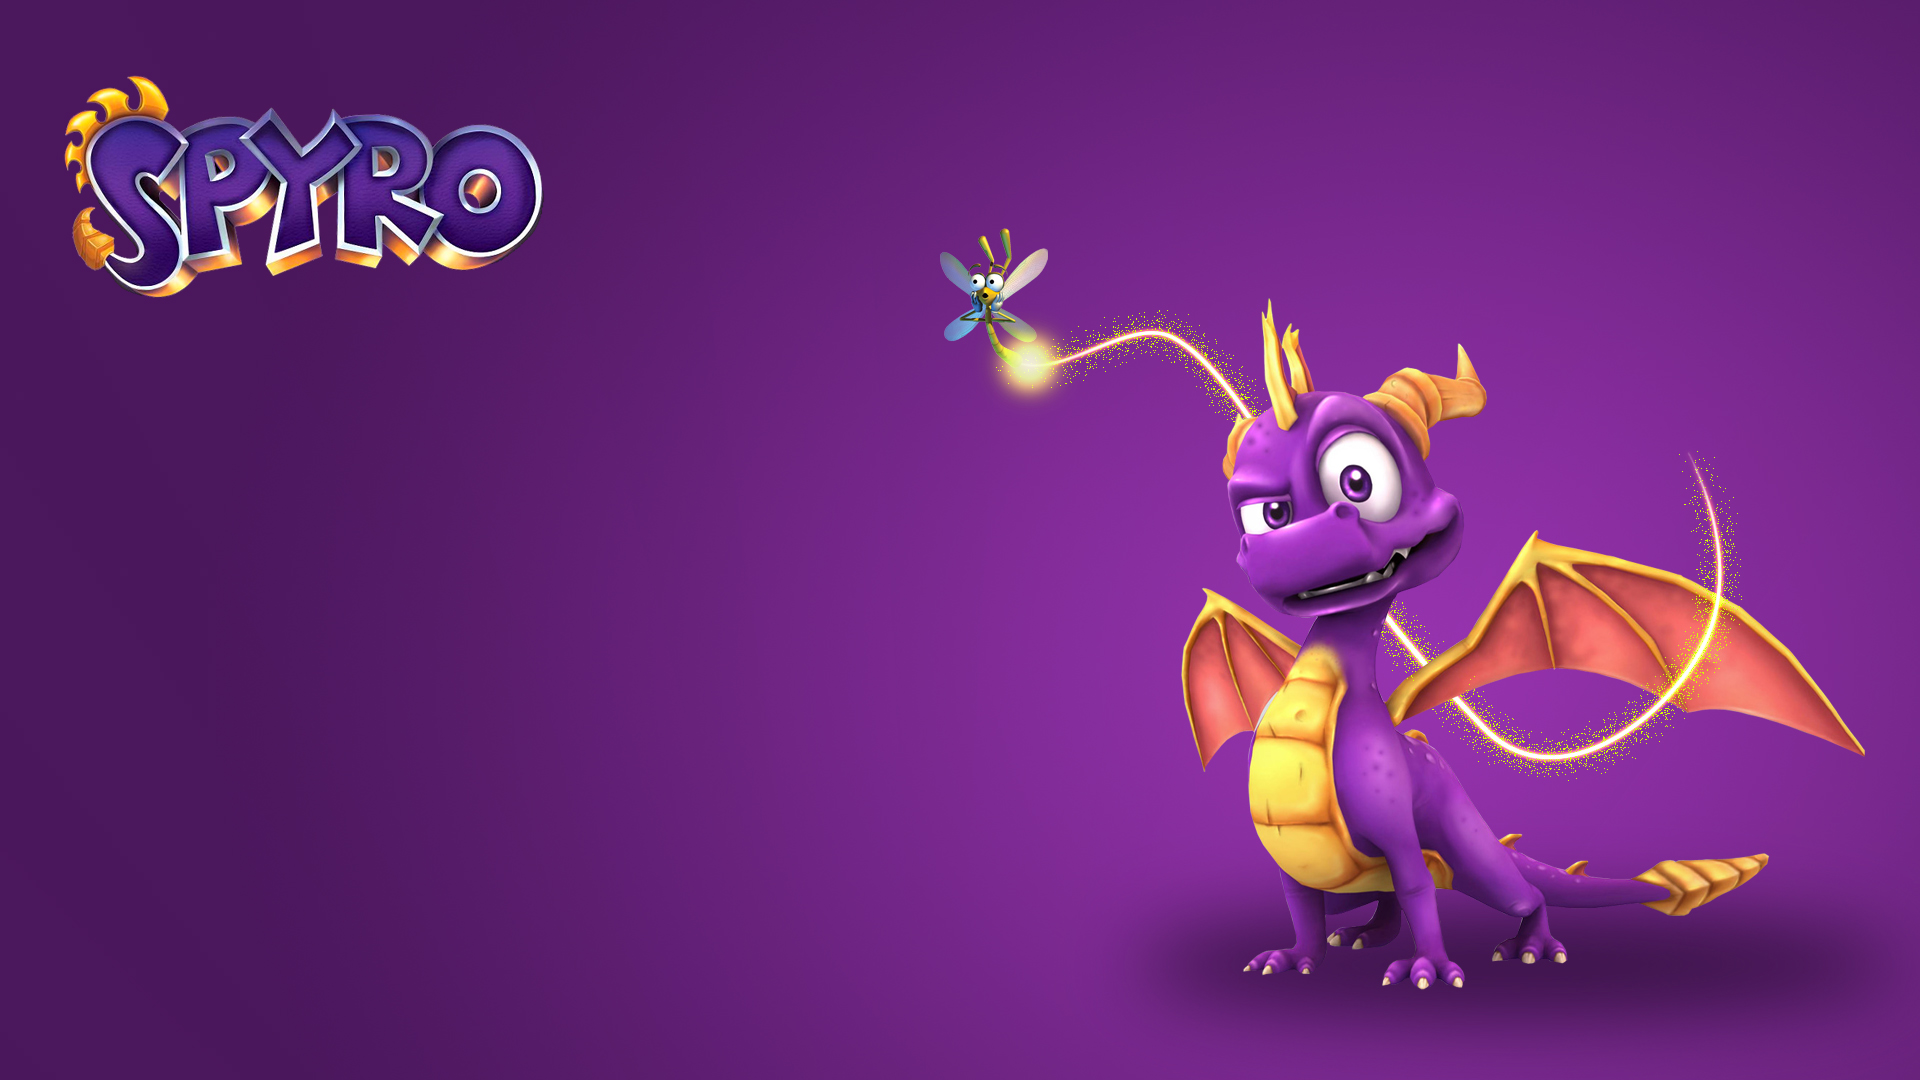 Video Game The Legend of Spyro: A New Beginning HD Wallpaper | Background Image